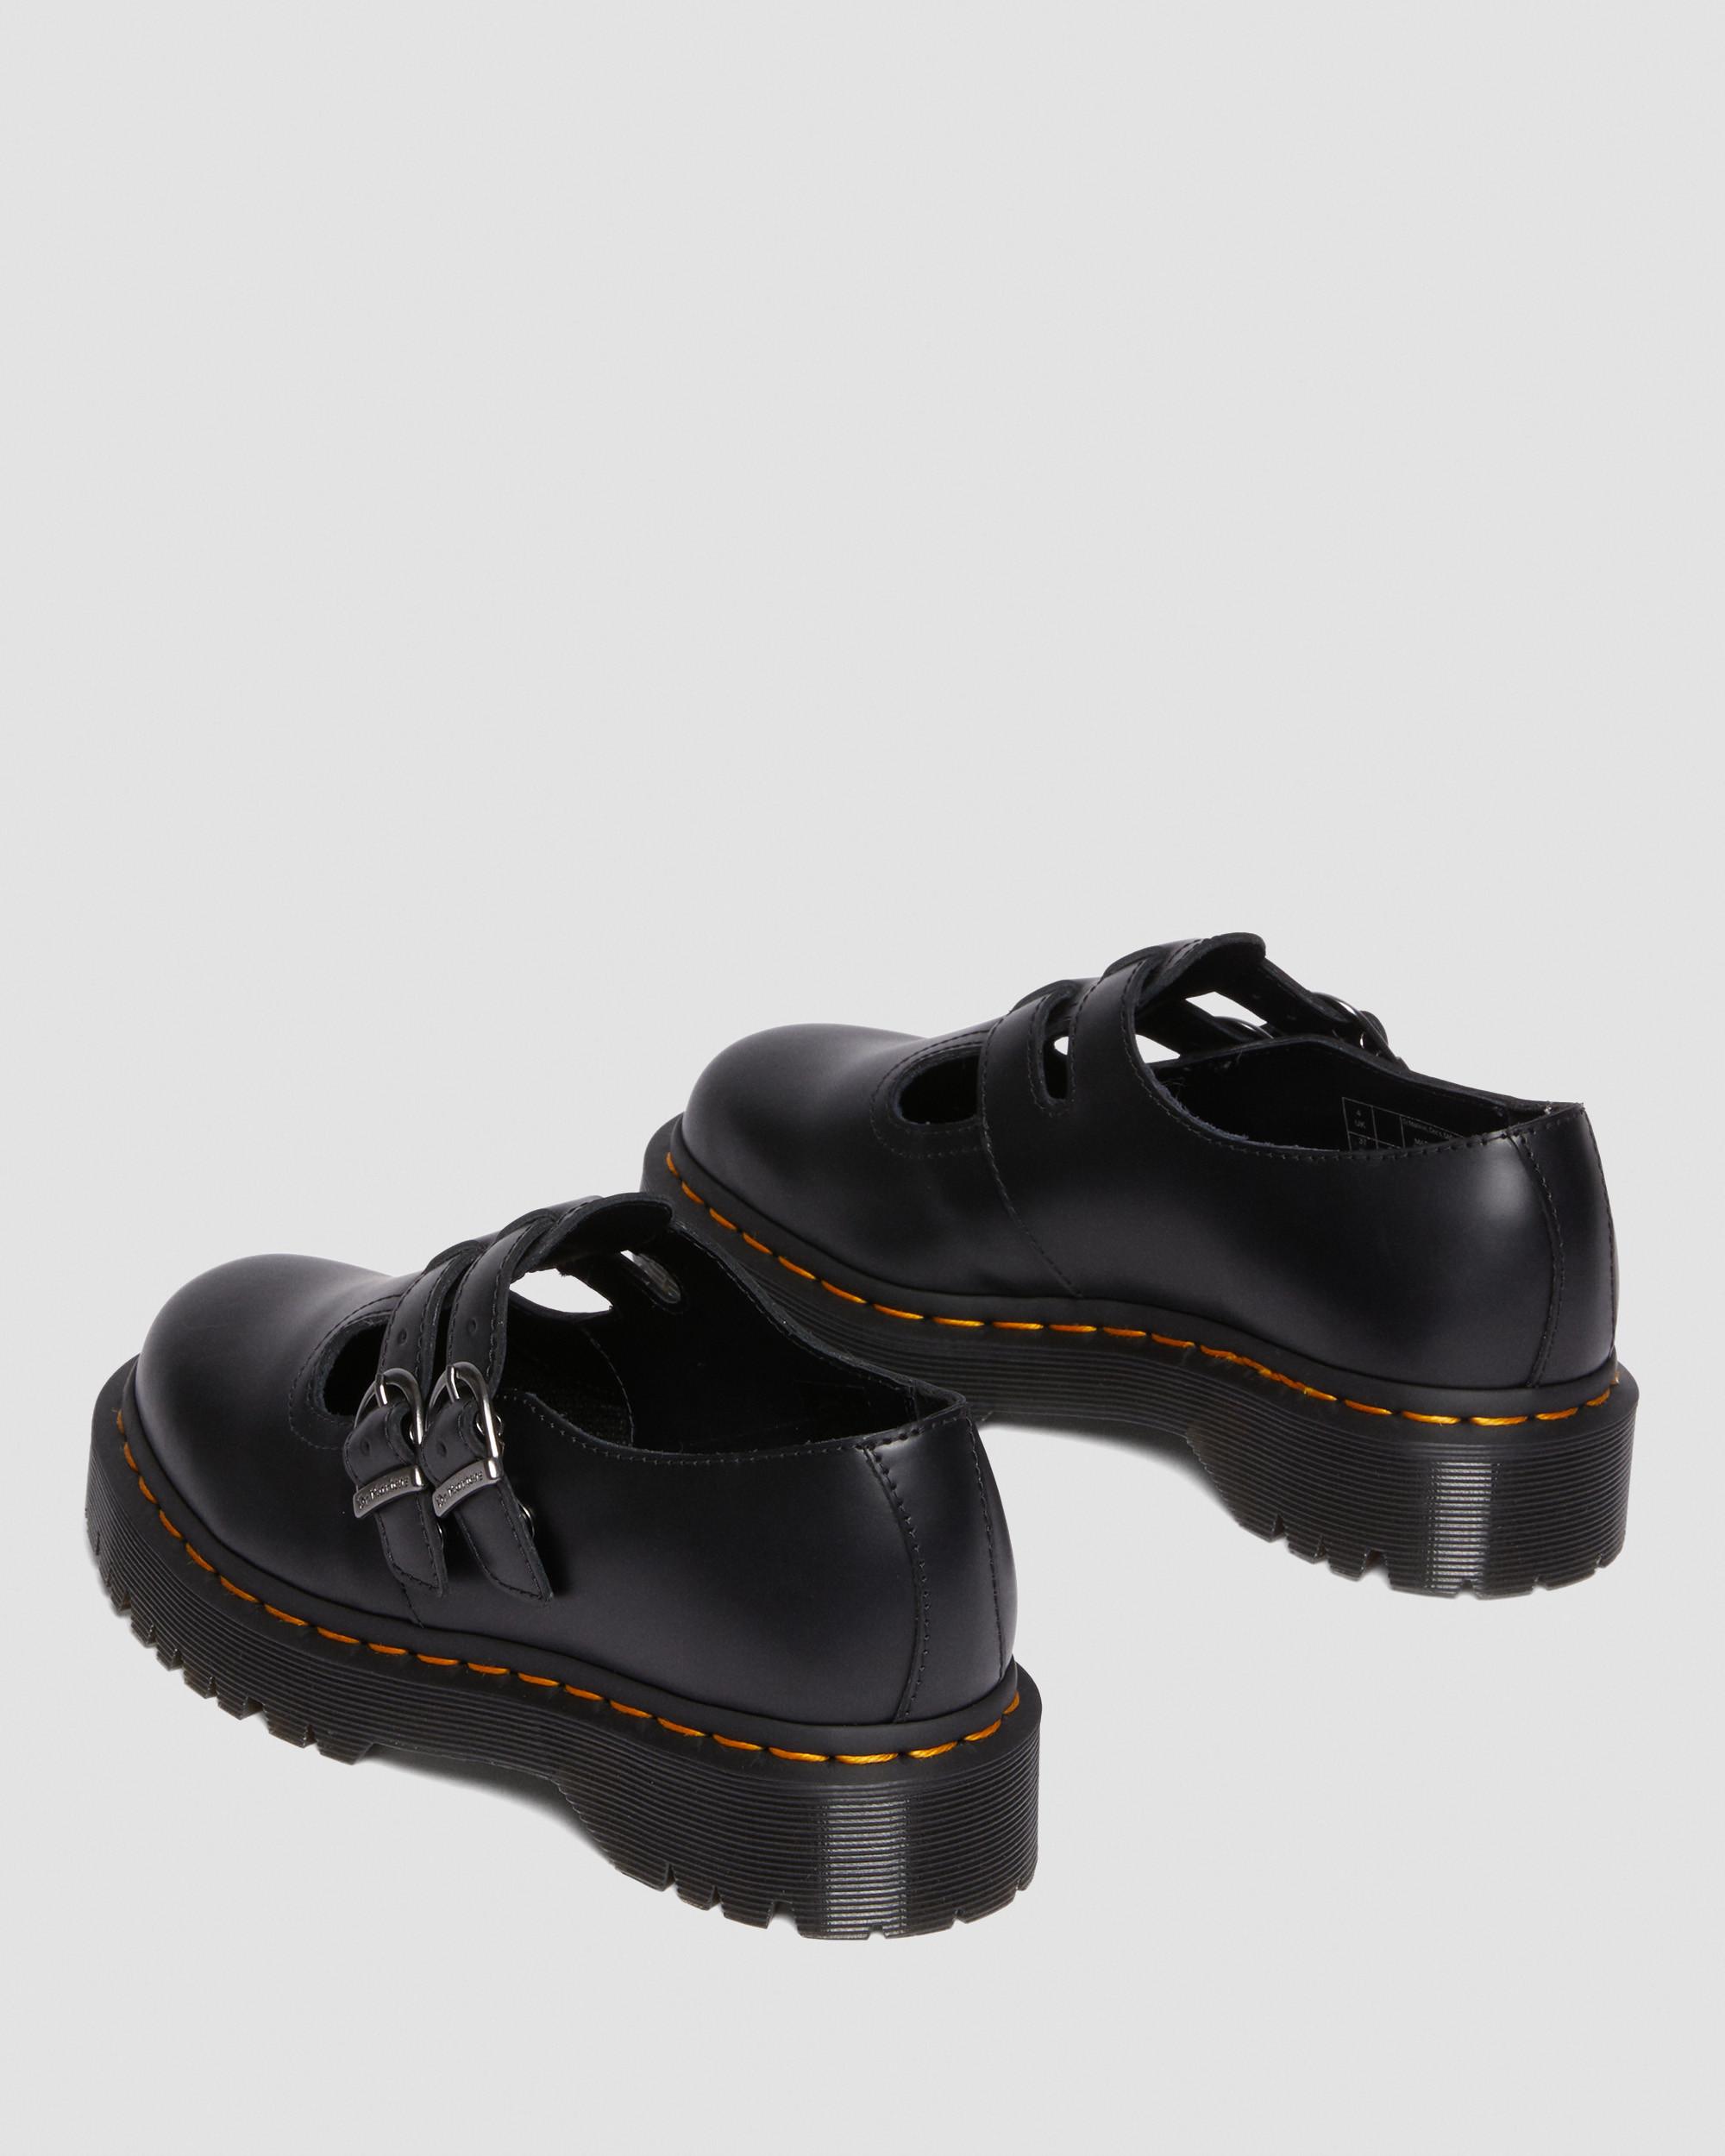 DR MARTENS 8065 II Bex Smooth Leather Platform Mary Jane Shoes